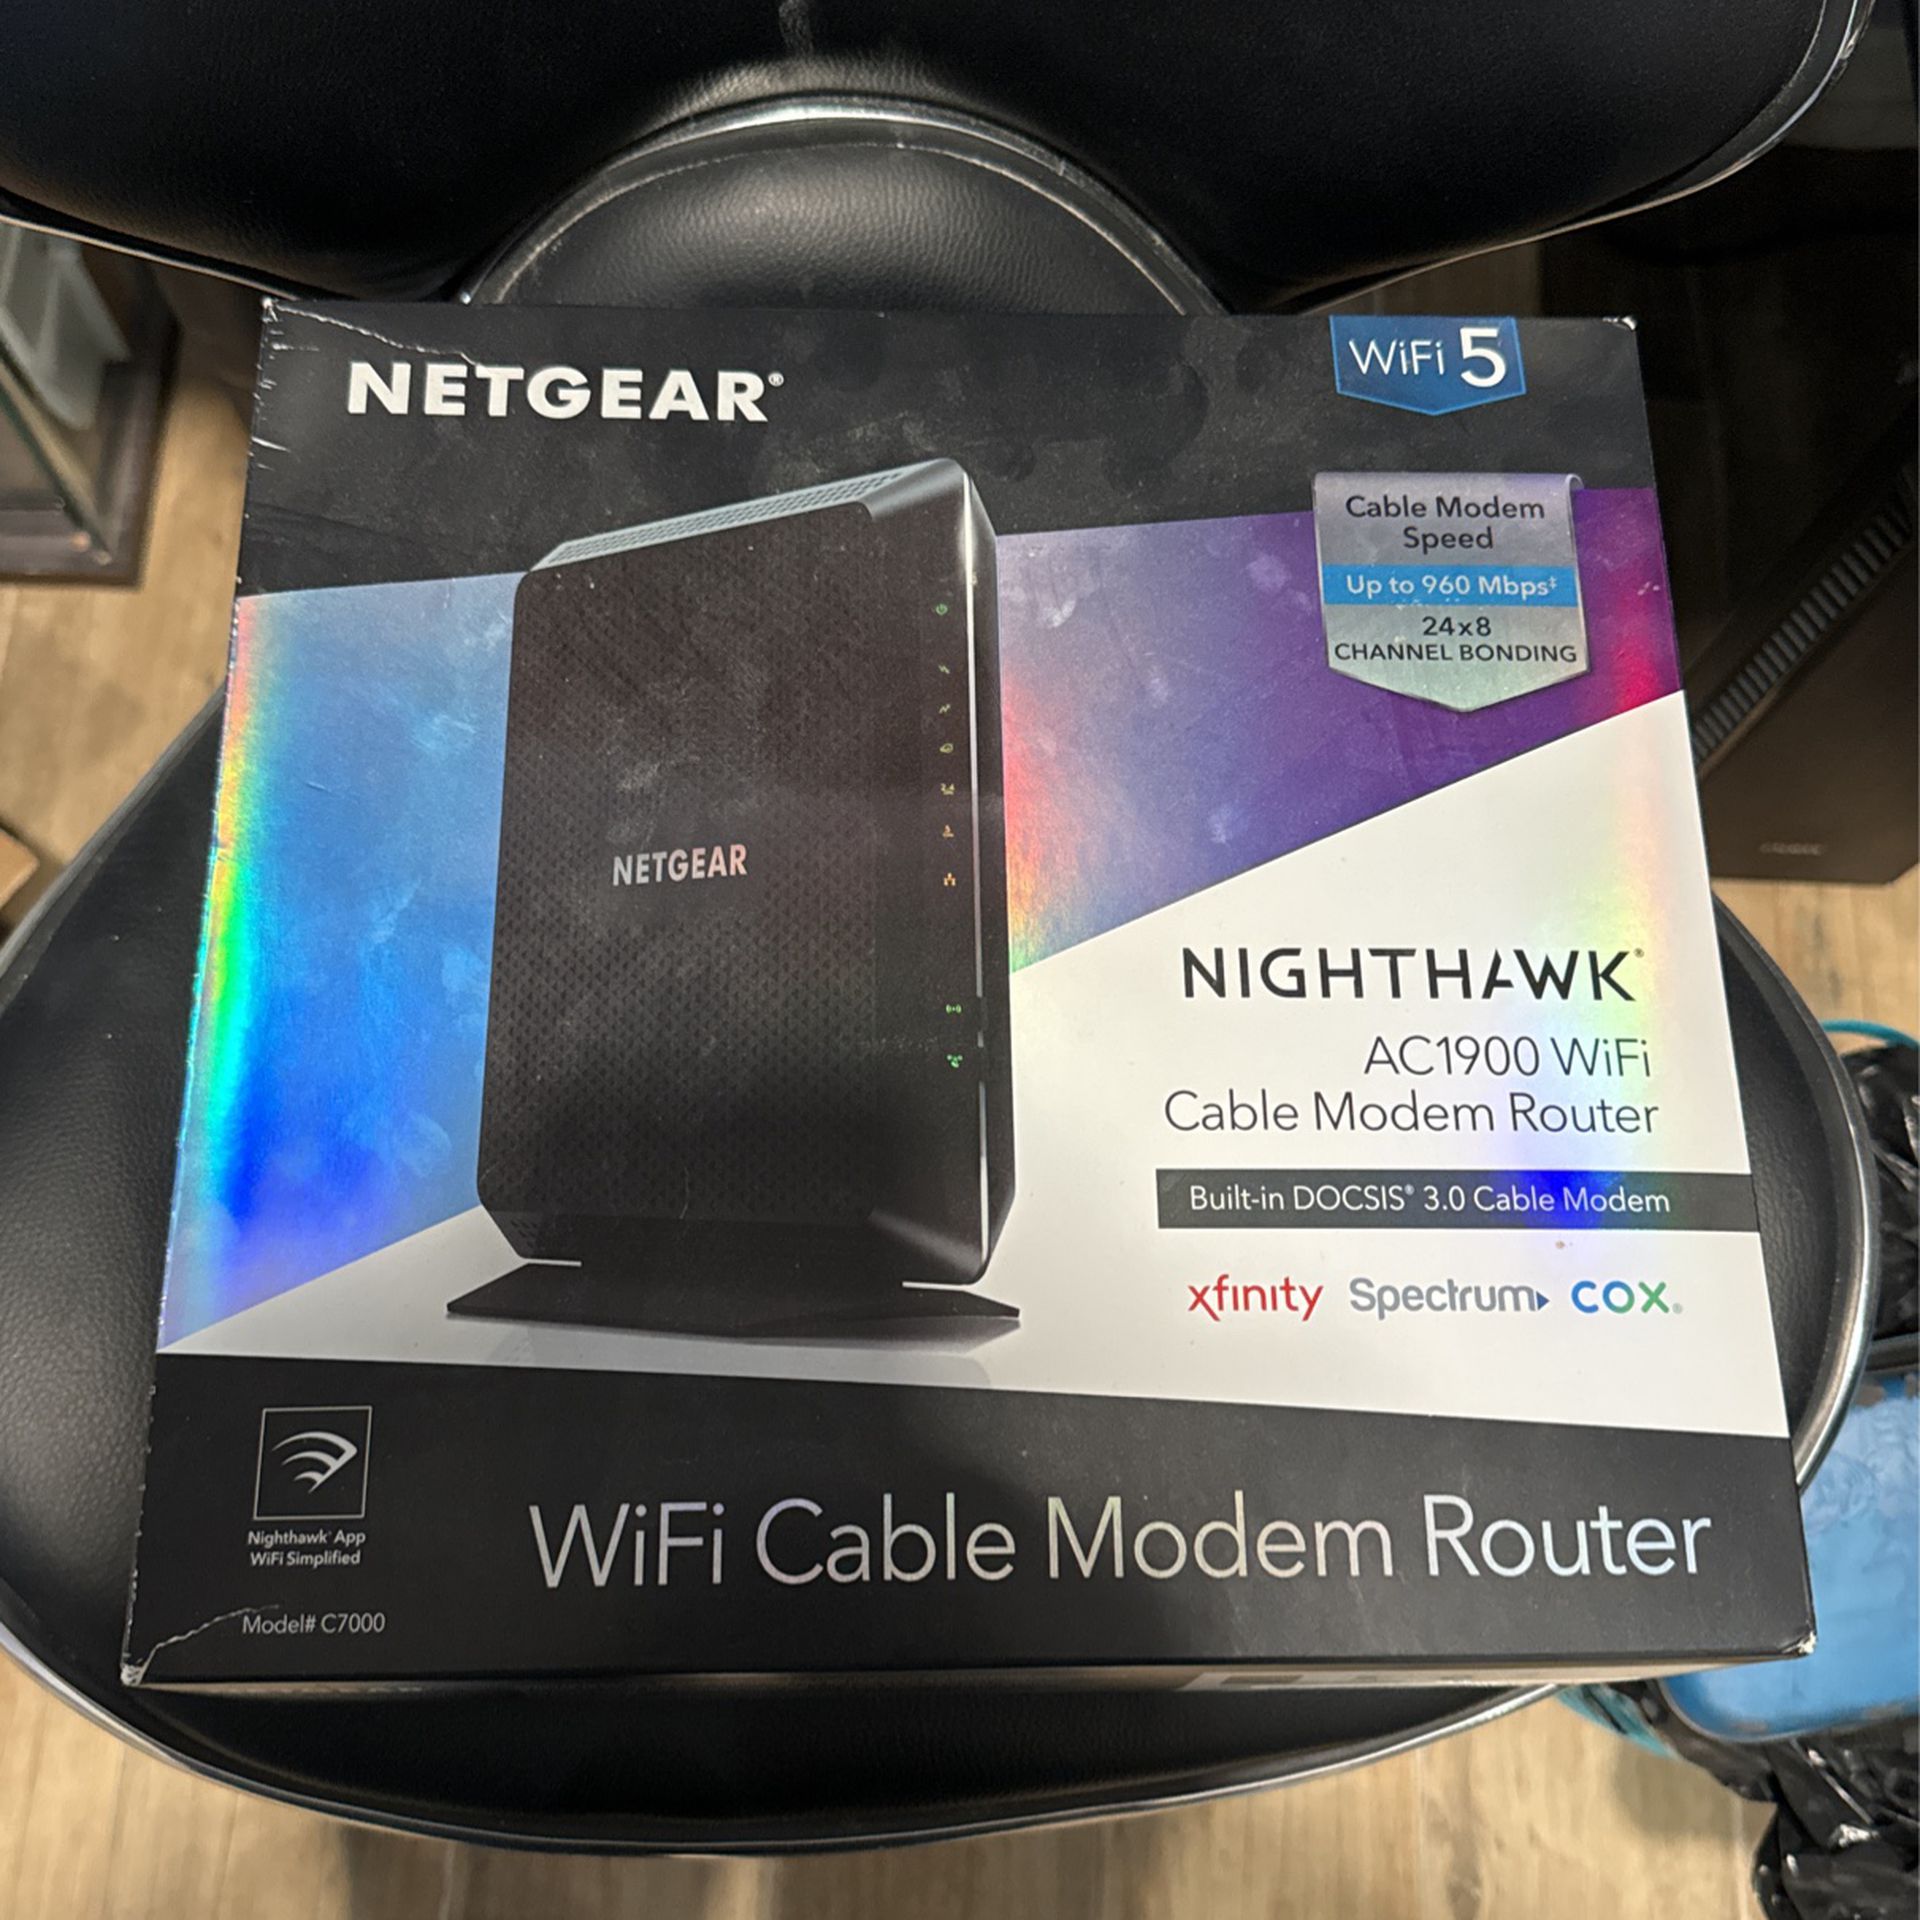 Nighthawk Wi-Fi Cable Modem Router